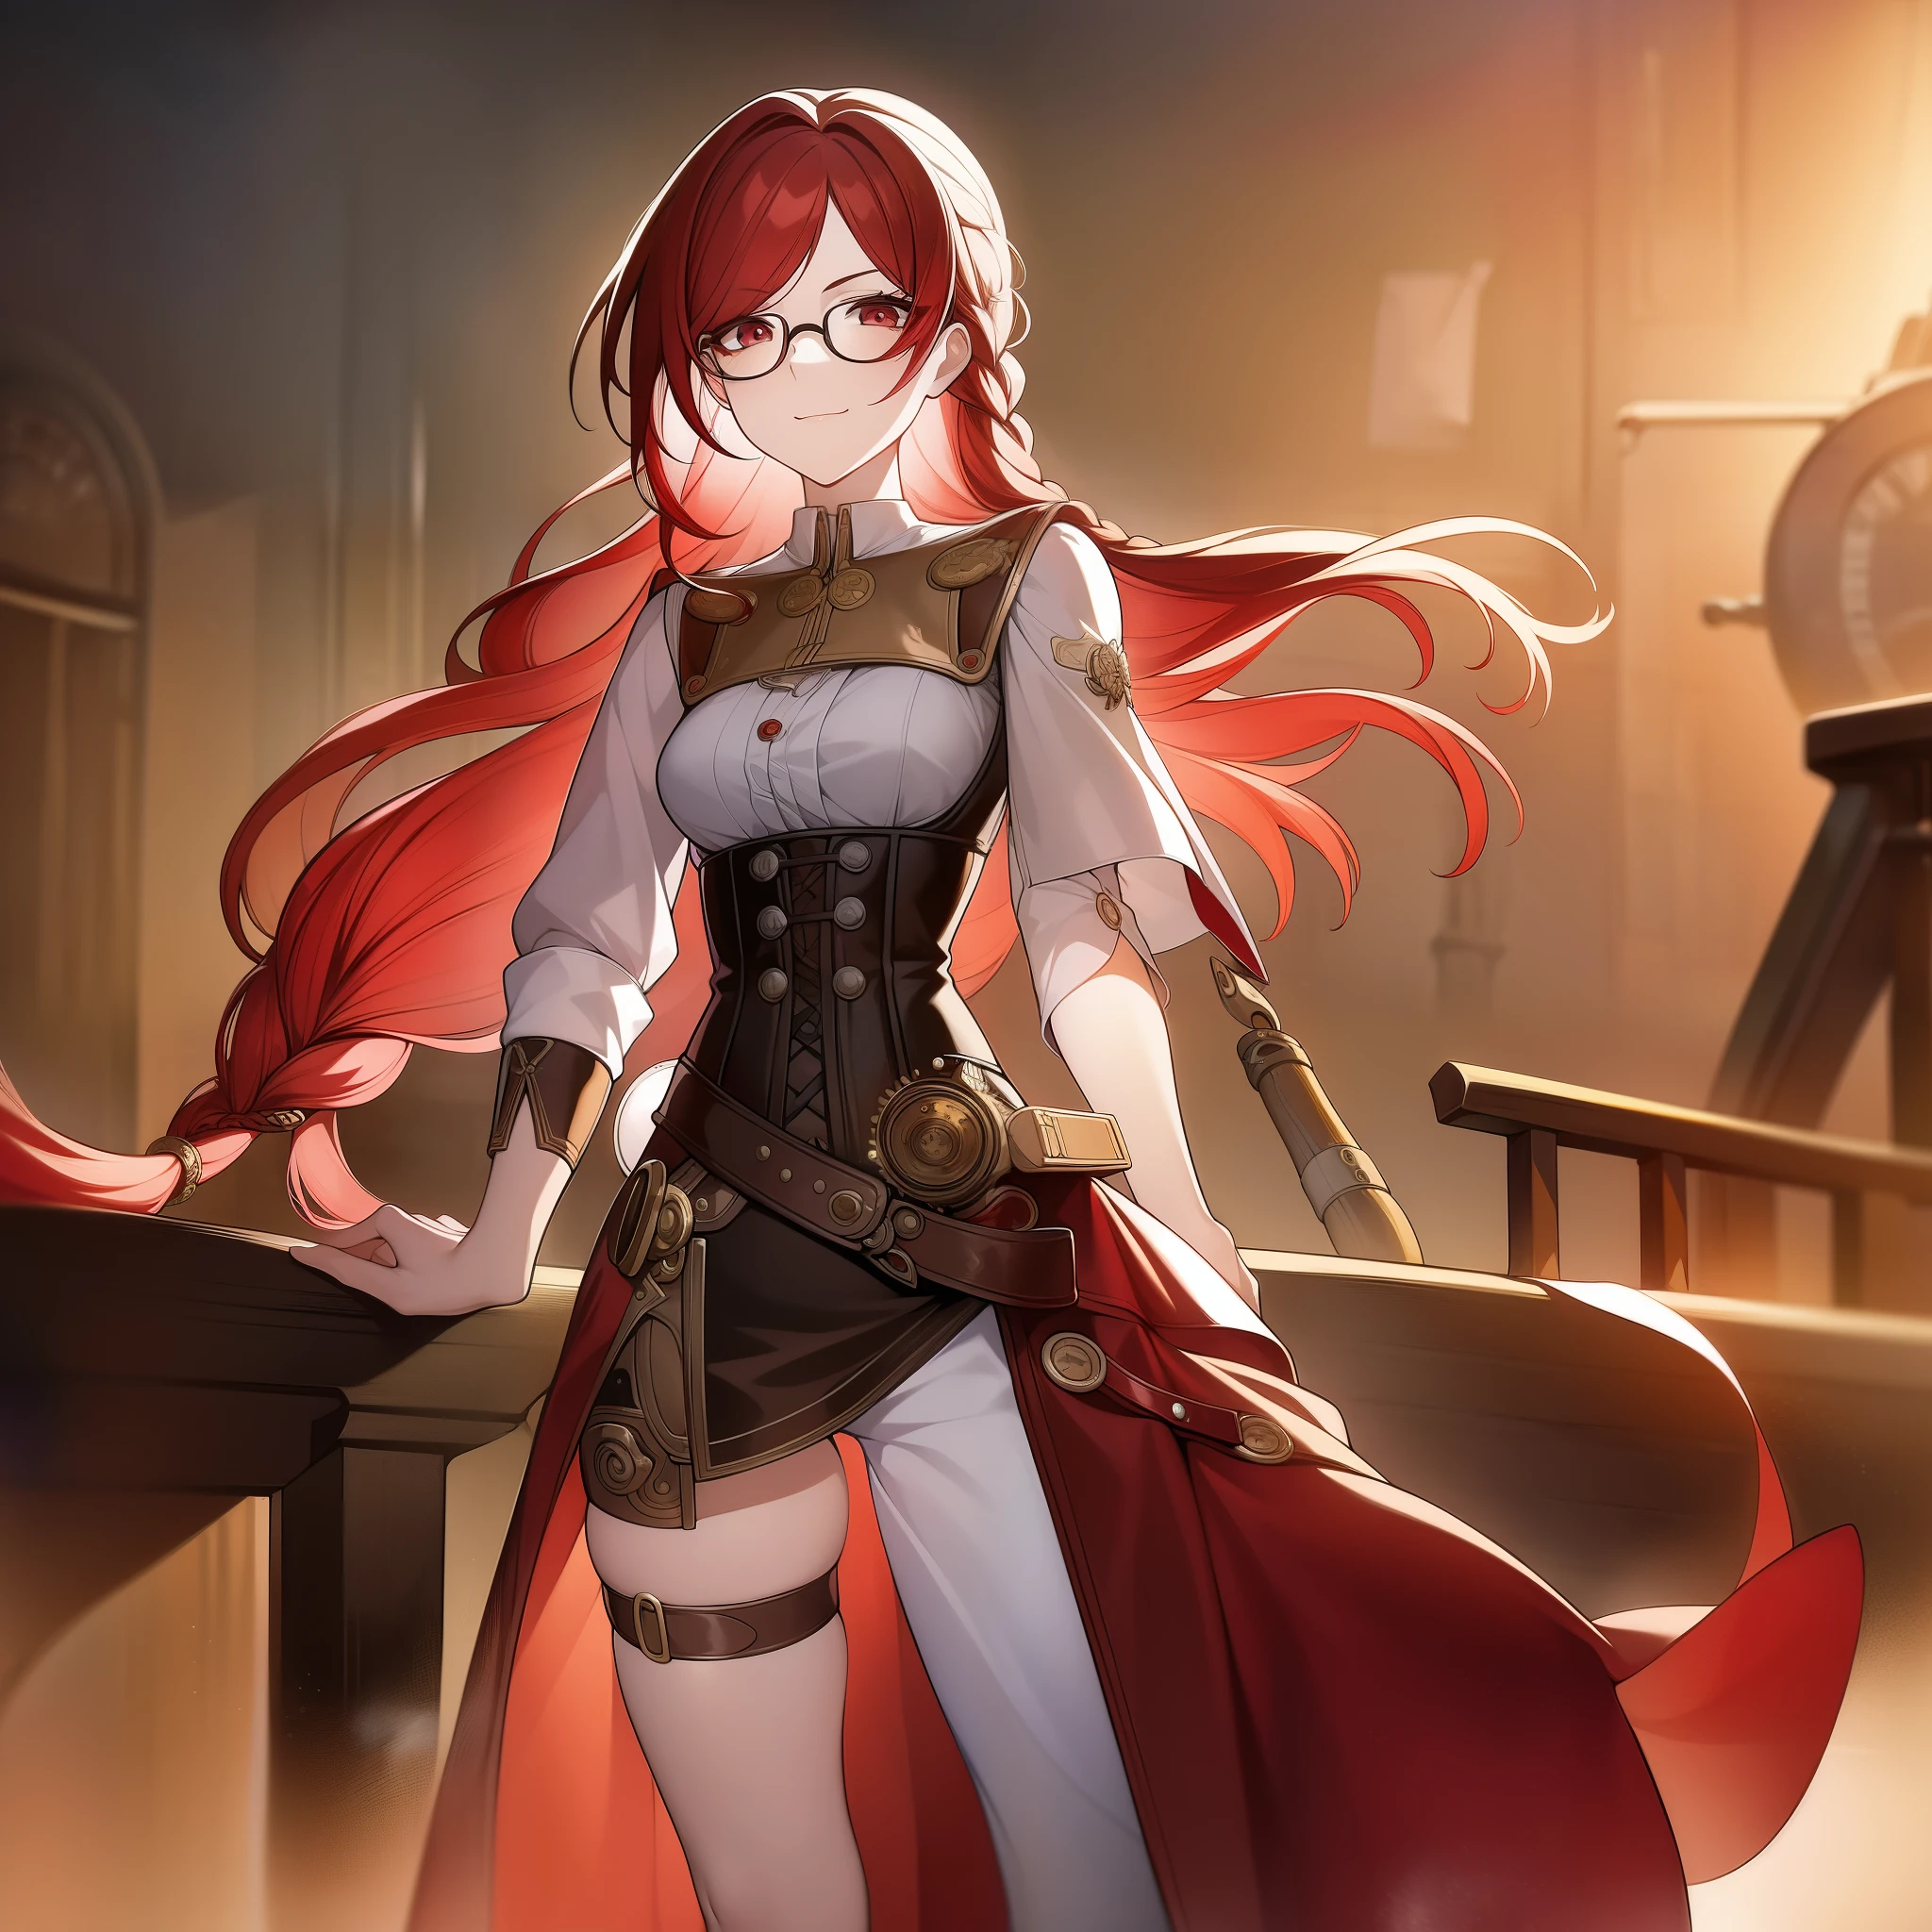 Woman with red hair, Hairstyle braid, tail, long hair, small bangs, Glasses, Adult woman, short girl, brown eyes, Round eyes, a white blouse, Steam punk, a corset, Steam punk одежда, short shorts, bare legs, Graceful hands, High quality, masterpiece, smile, cute face
